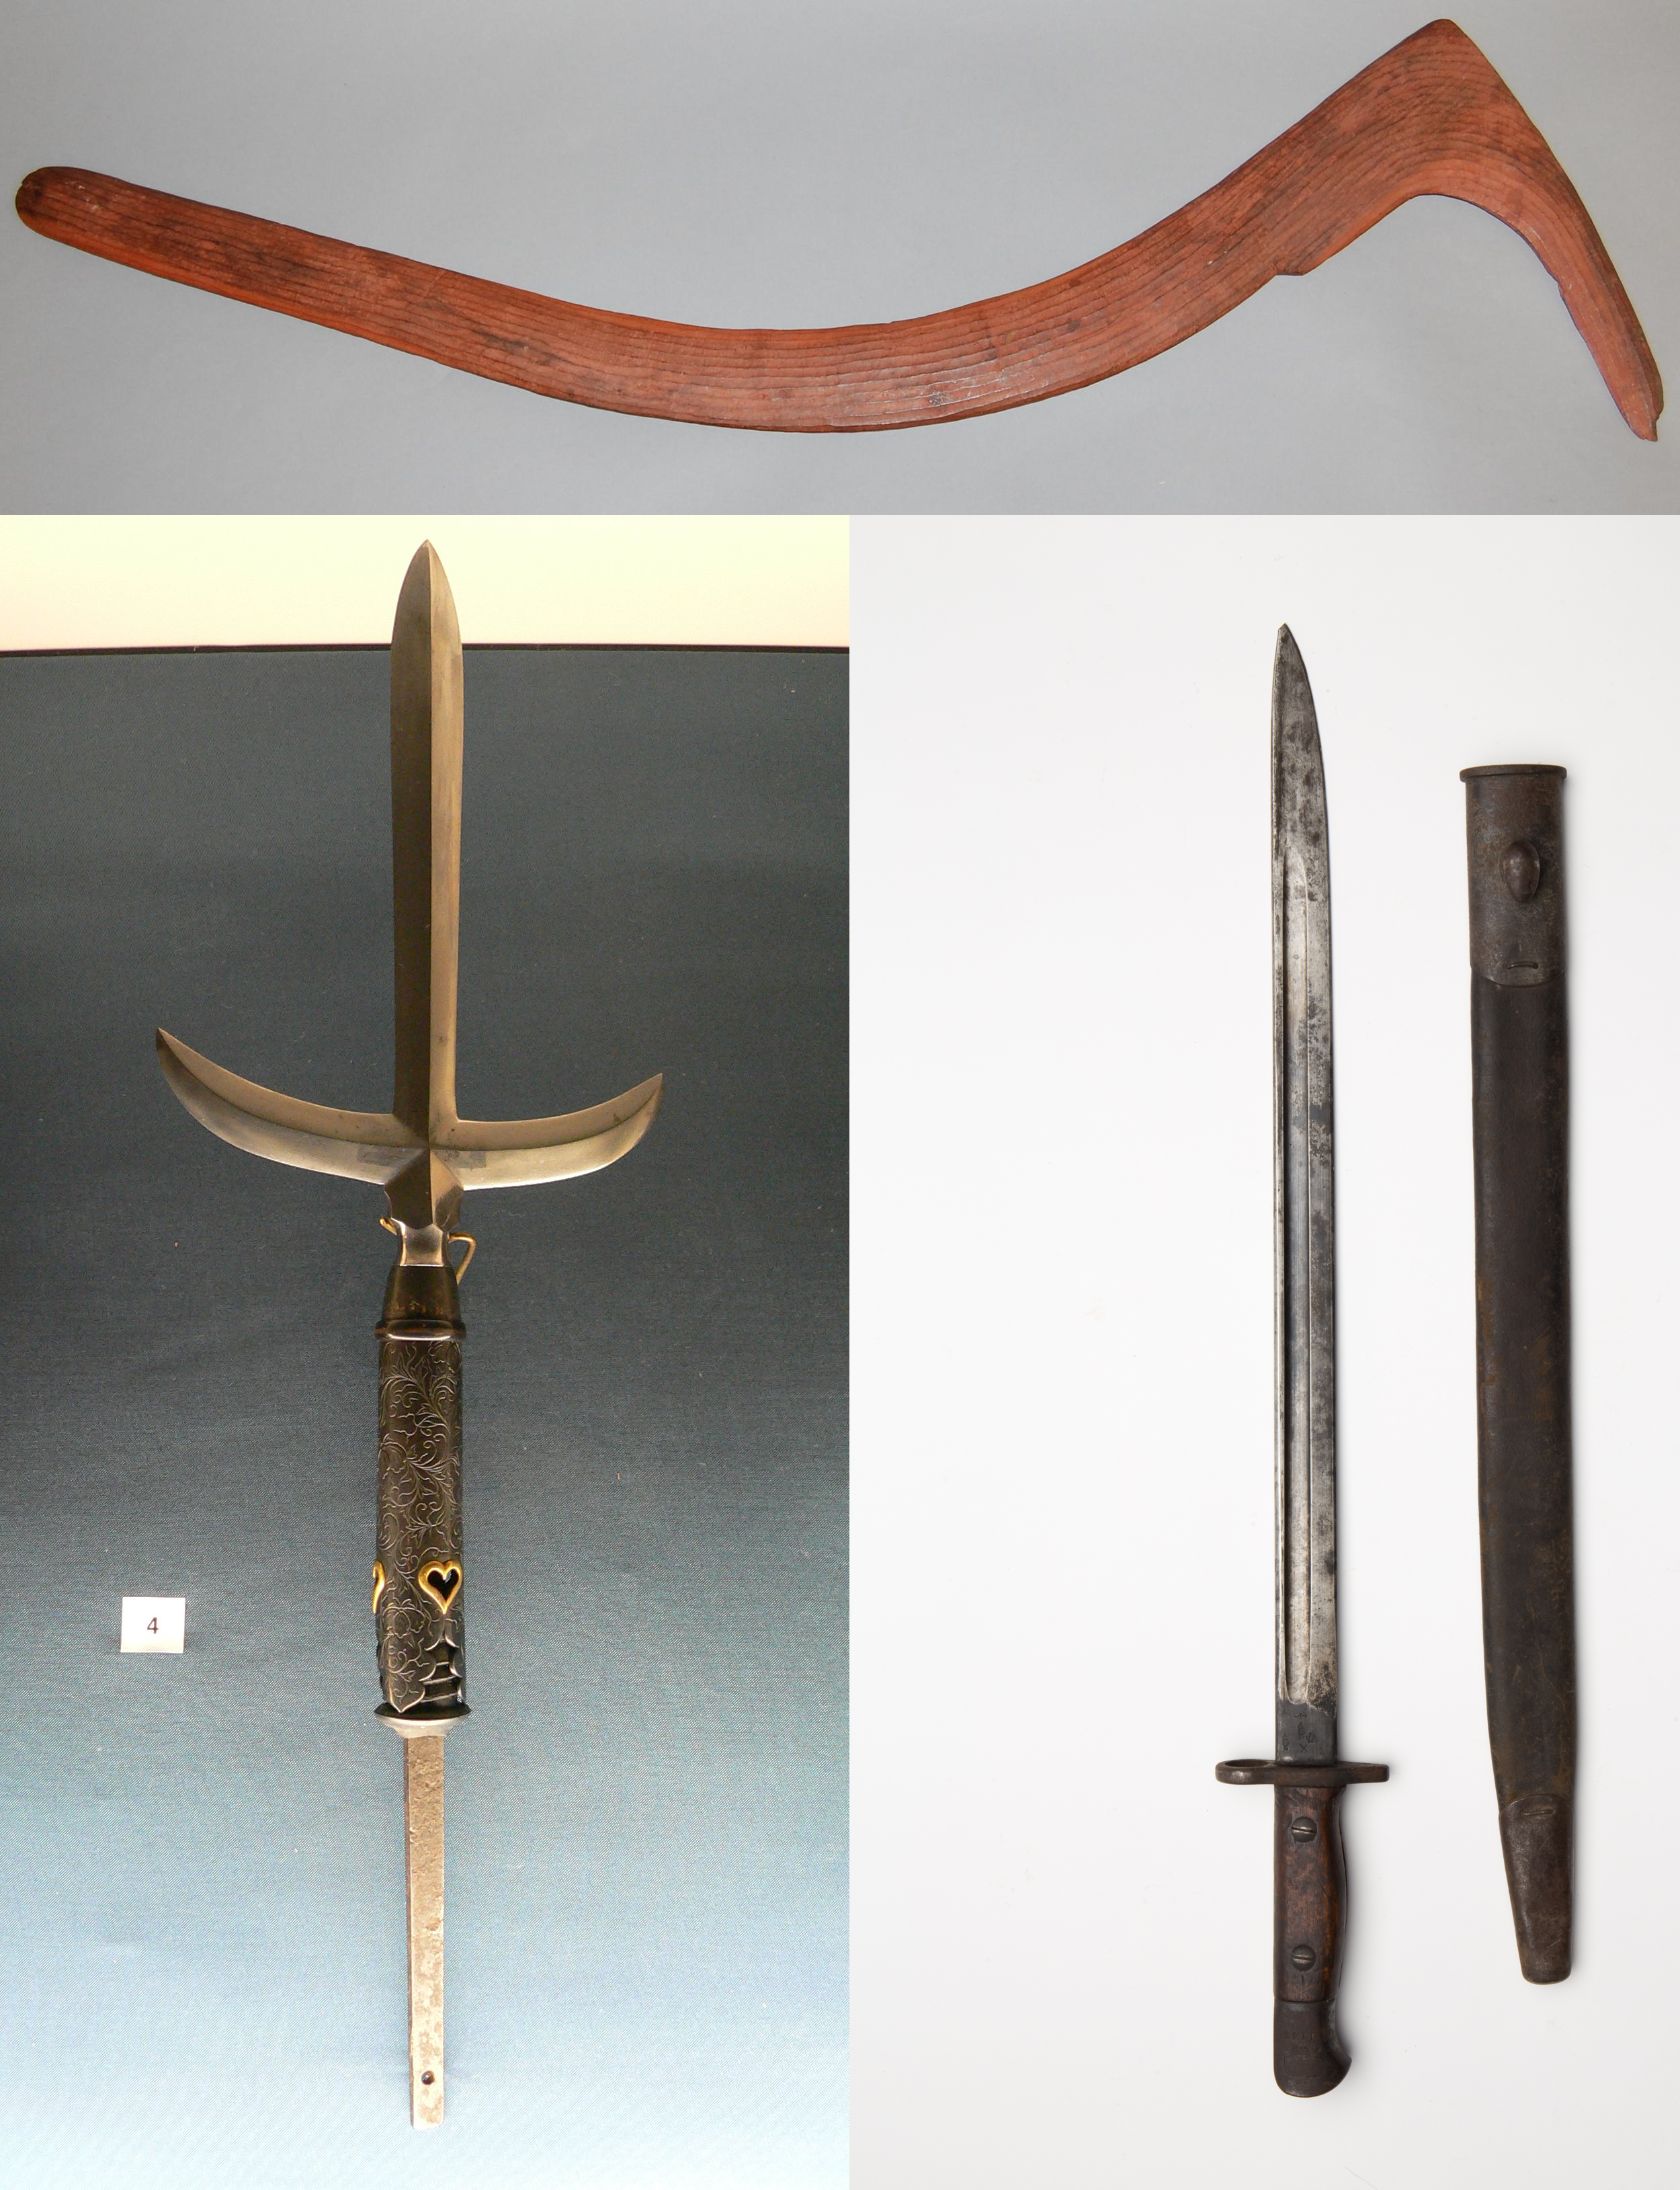 weird bladed weapons